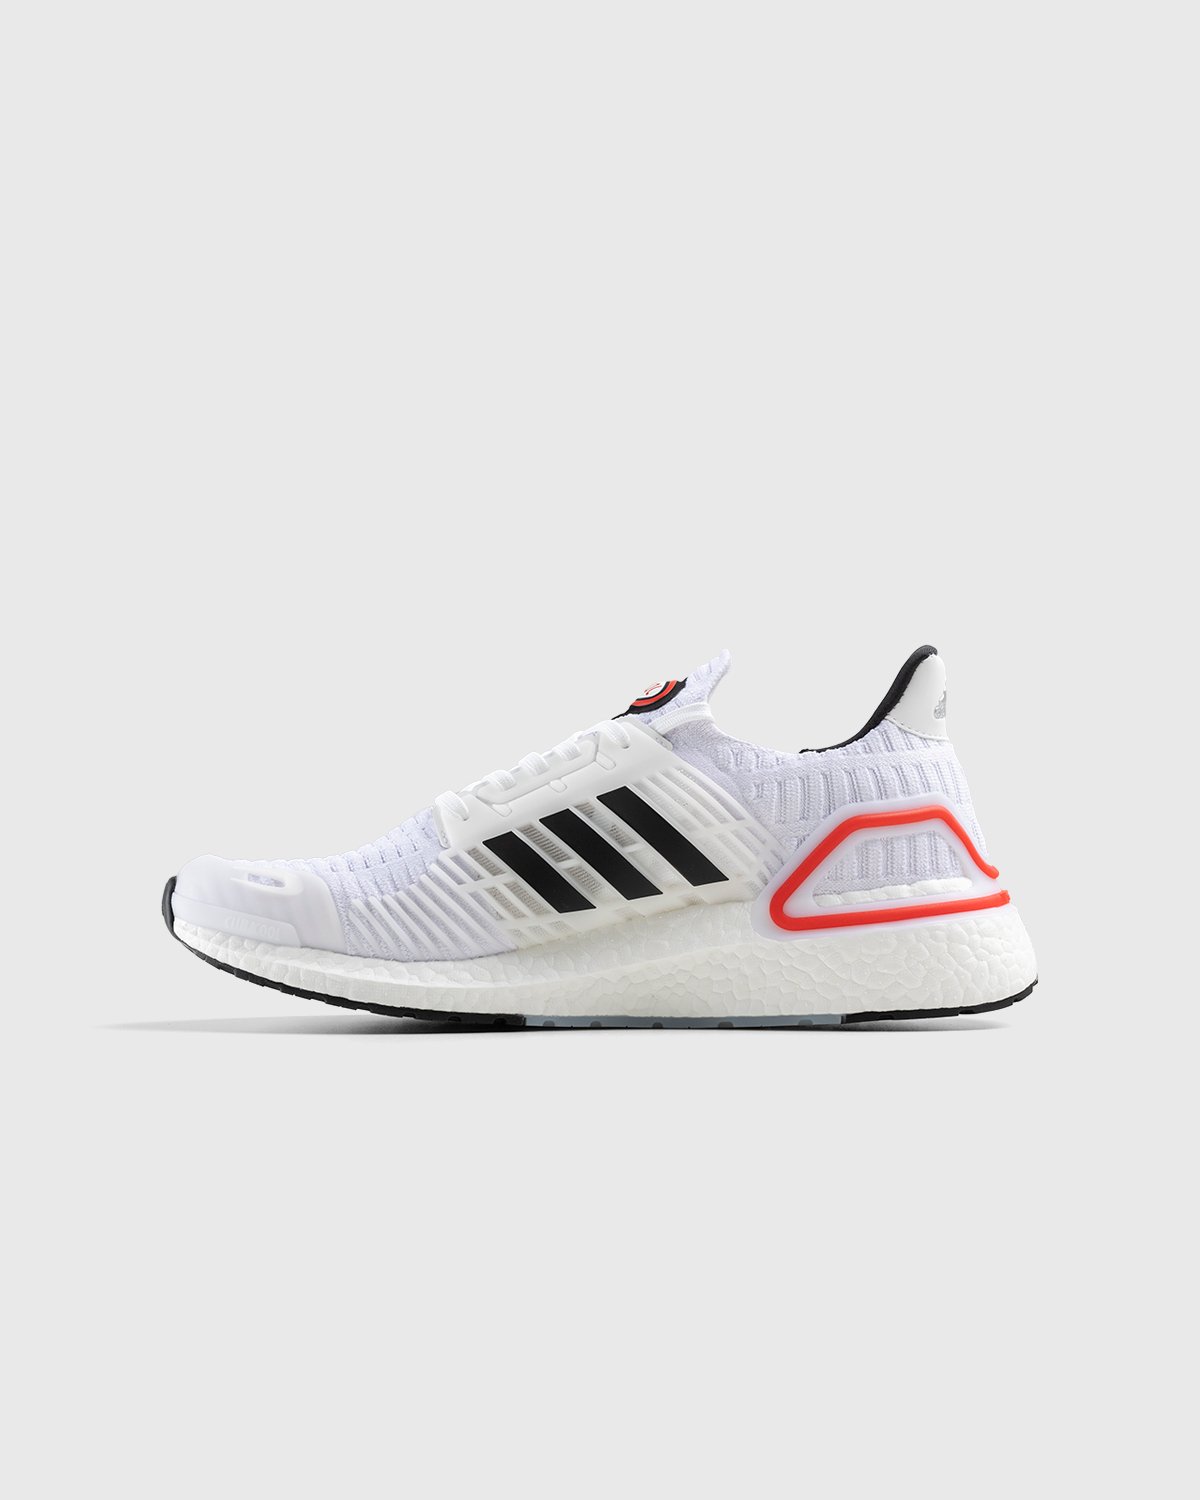 Adidas - Ultraboost Climacool 1 DNA White/Black/Red - Footwear - White - Image 2